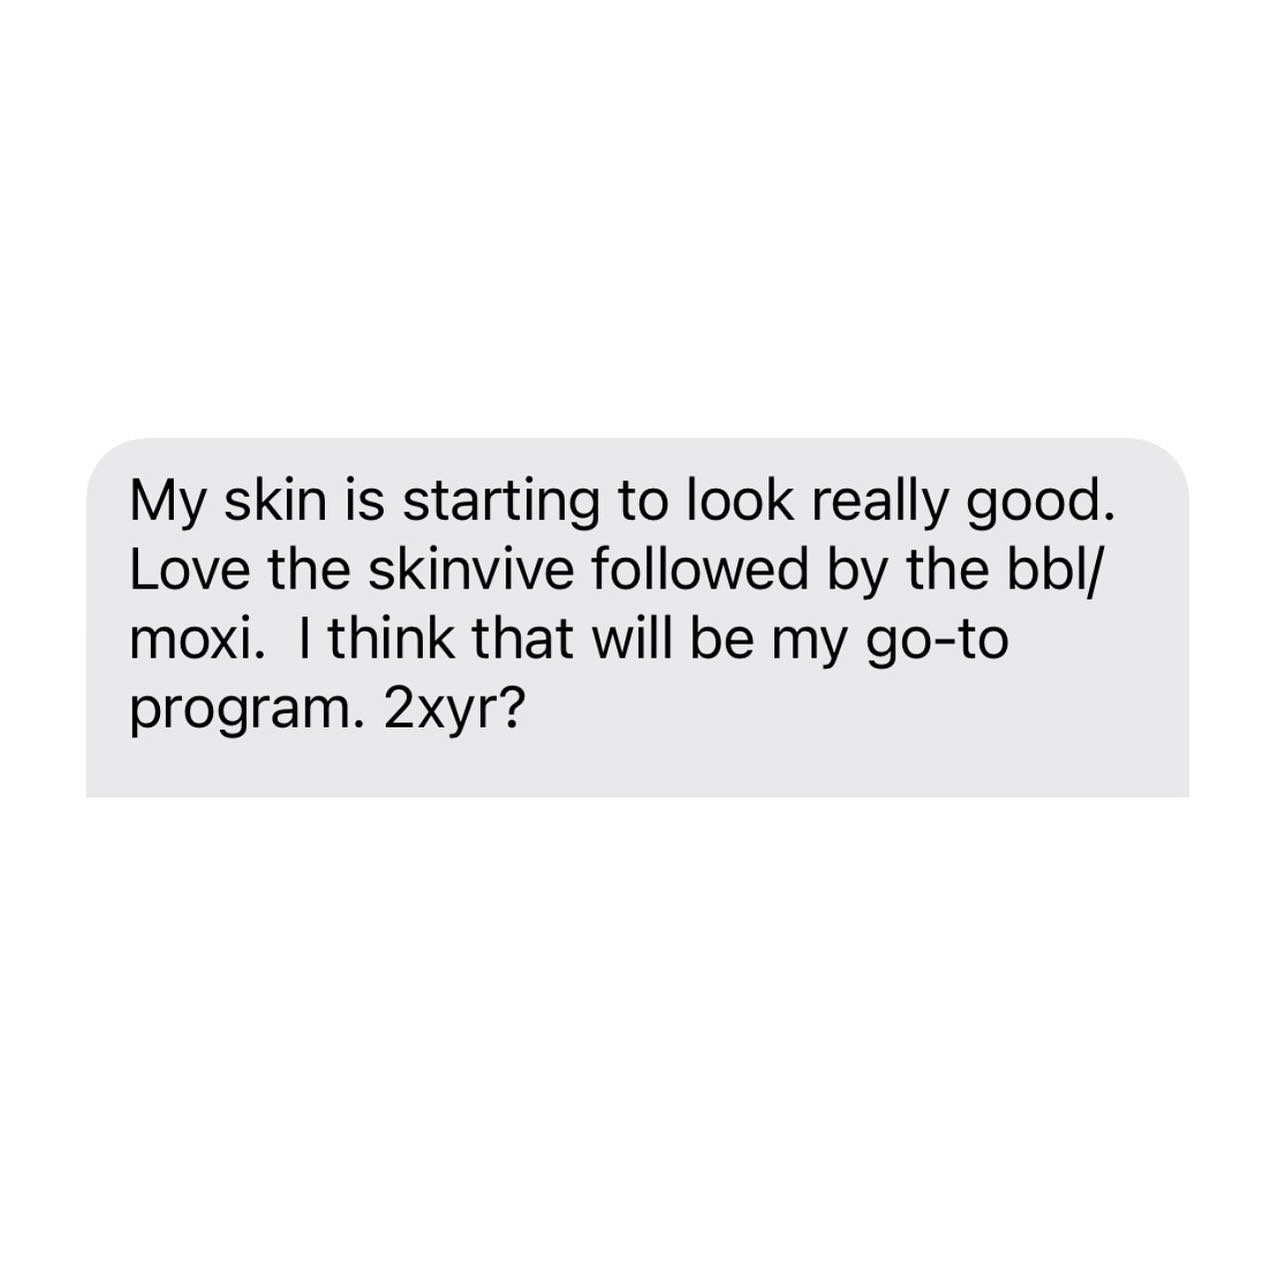 Skinvive + BBL / Moxi laser is what treatment stack dreams are made of! 🤍